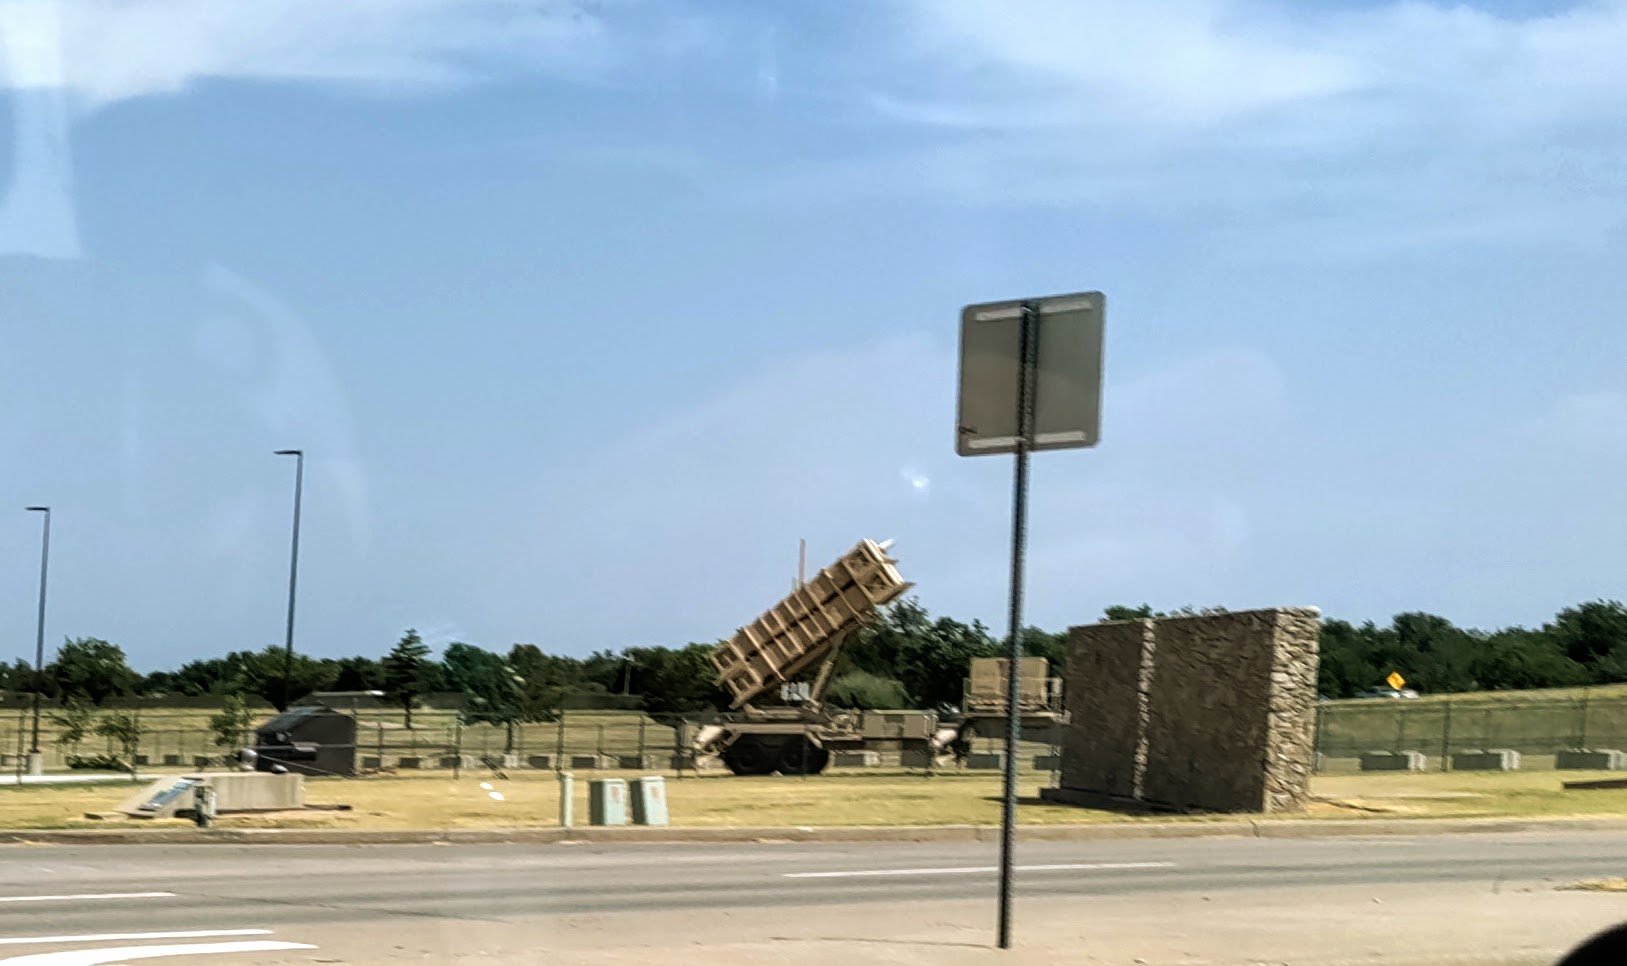 pictures from trip to Fort Sill, Oklahoma